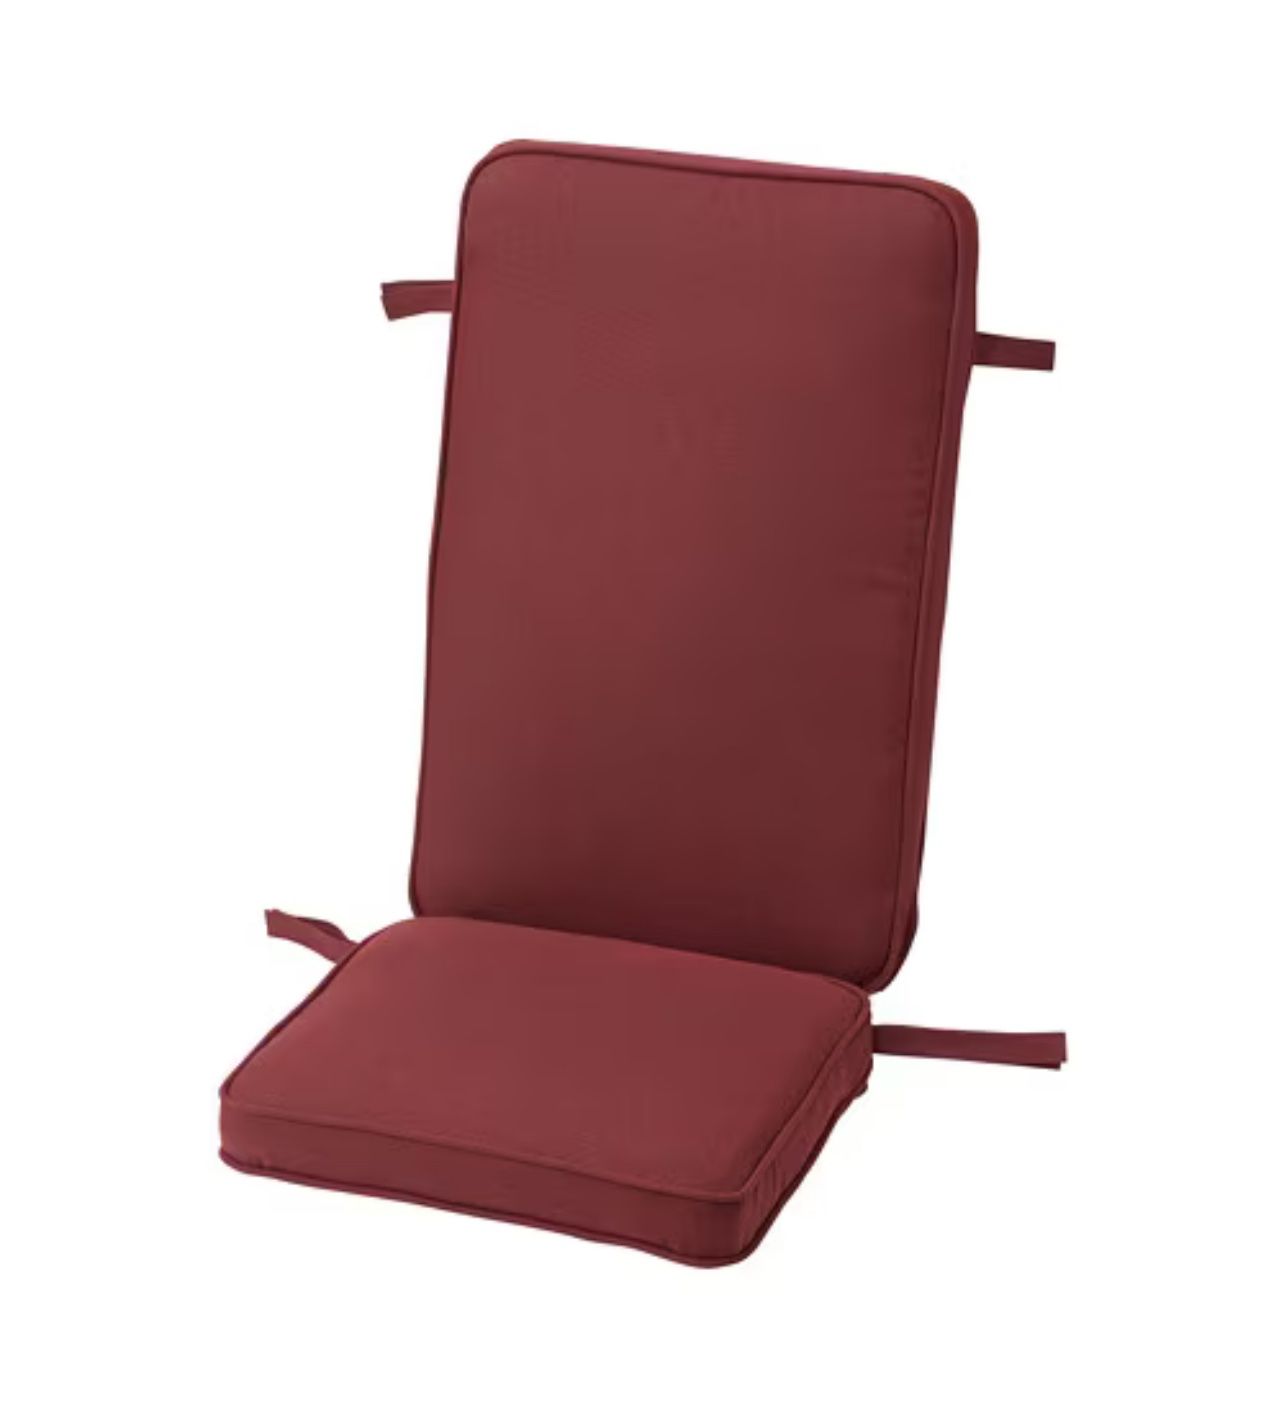 IKEA 504.835.19 JÄRPÖN Cover for seat/back pad outdoor brown-red 45 5/8x17 3/4